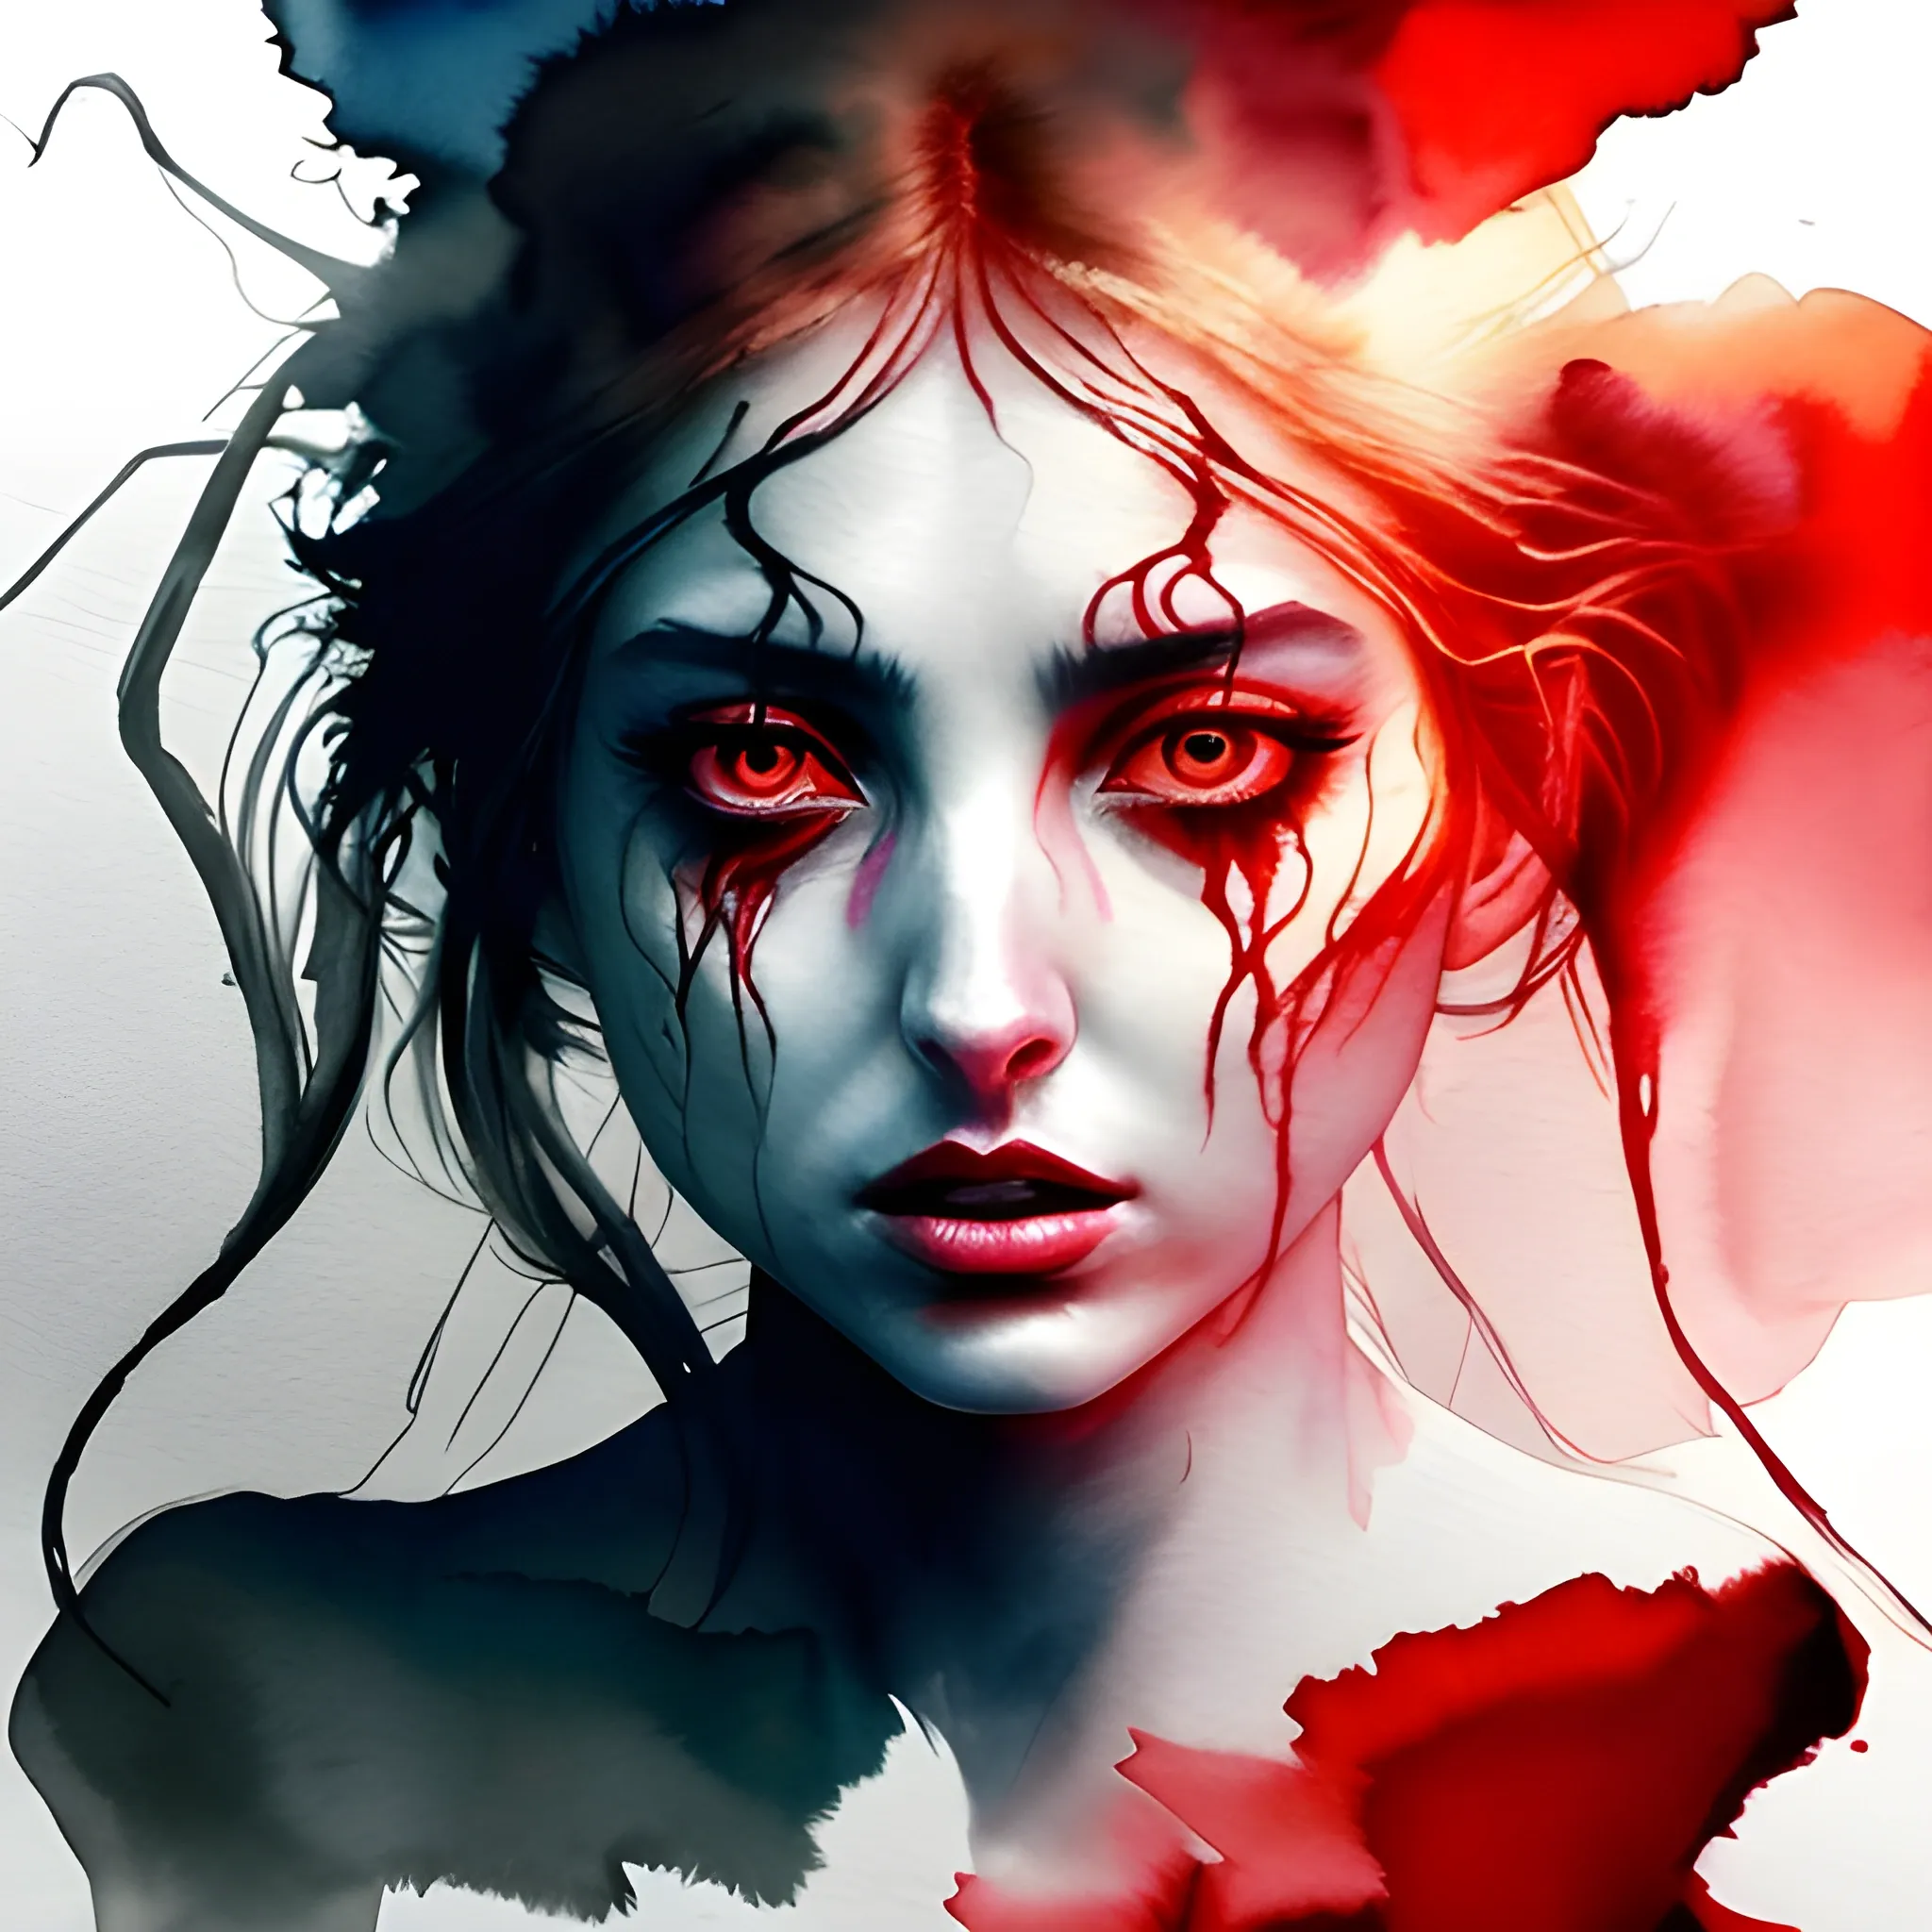 Illustrate a mesmerizing scene where a woman with the face of Ana de Armas undergoes a stunning transformation, becoming a malevolent demon with ethereal powers. Utilize watercolor techniques reminiscent of the renowned painter J.M.W. Turner, with the predominant use of the color red to accentuate the eerie beauty of her demonic form